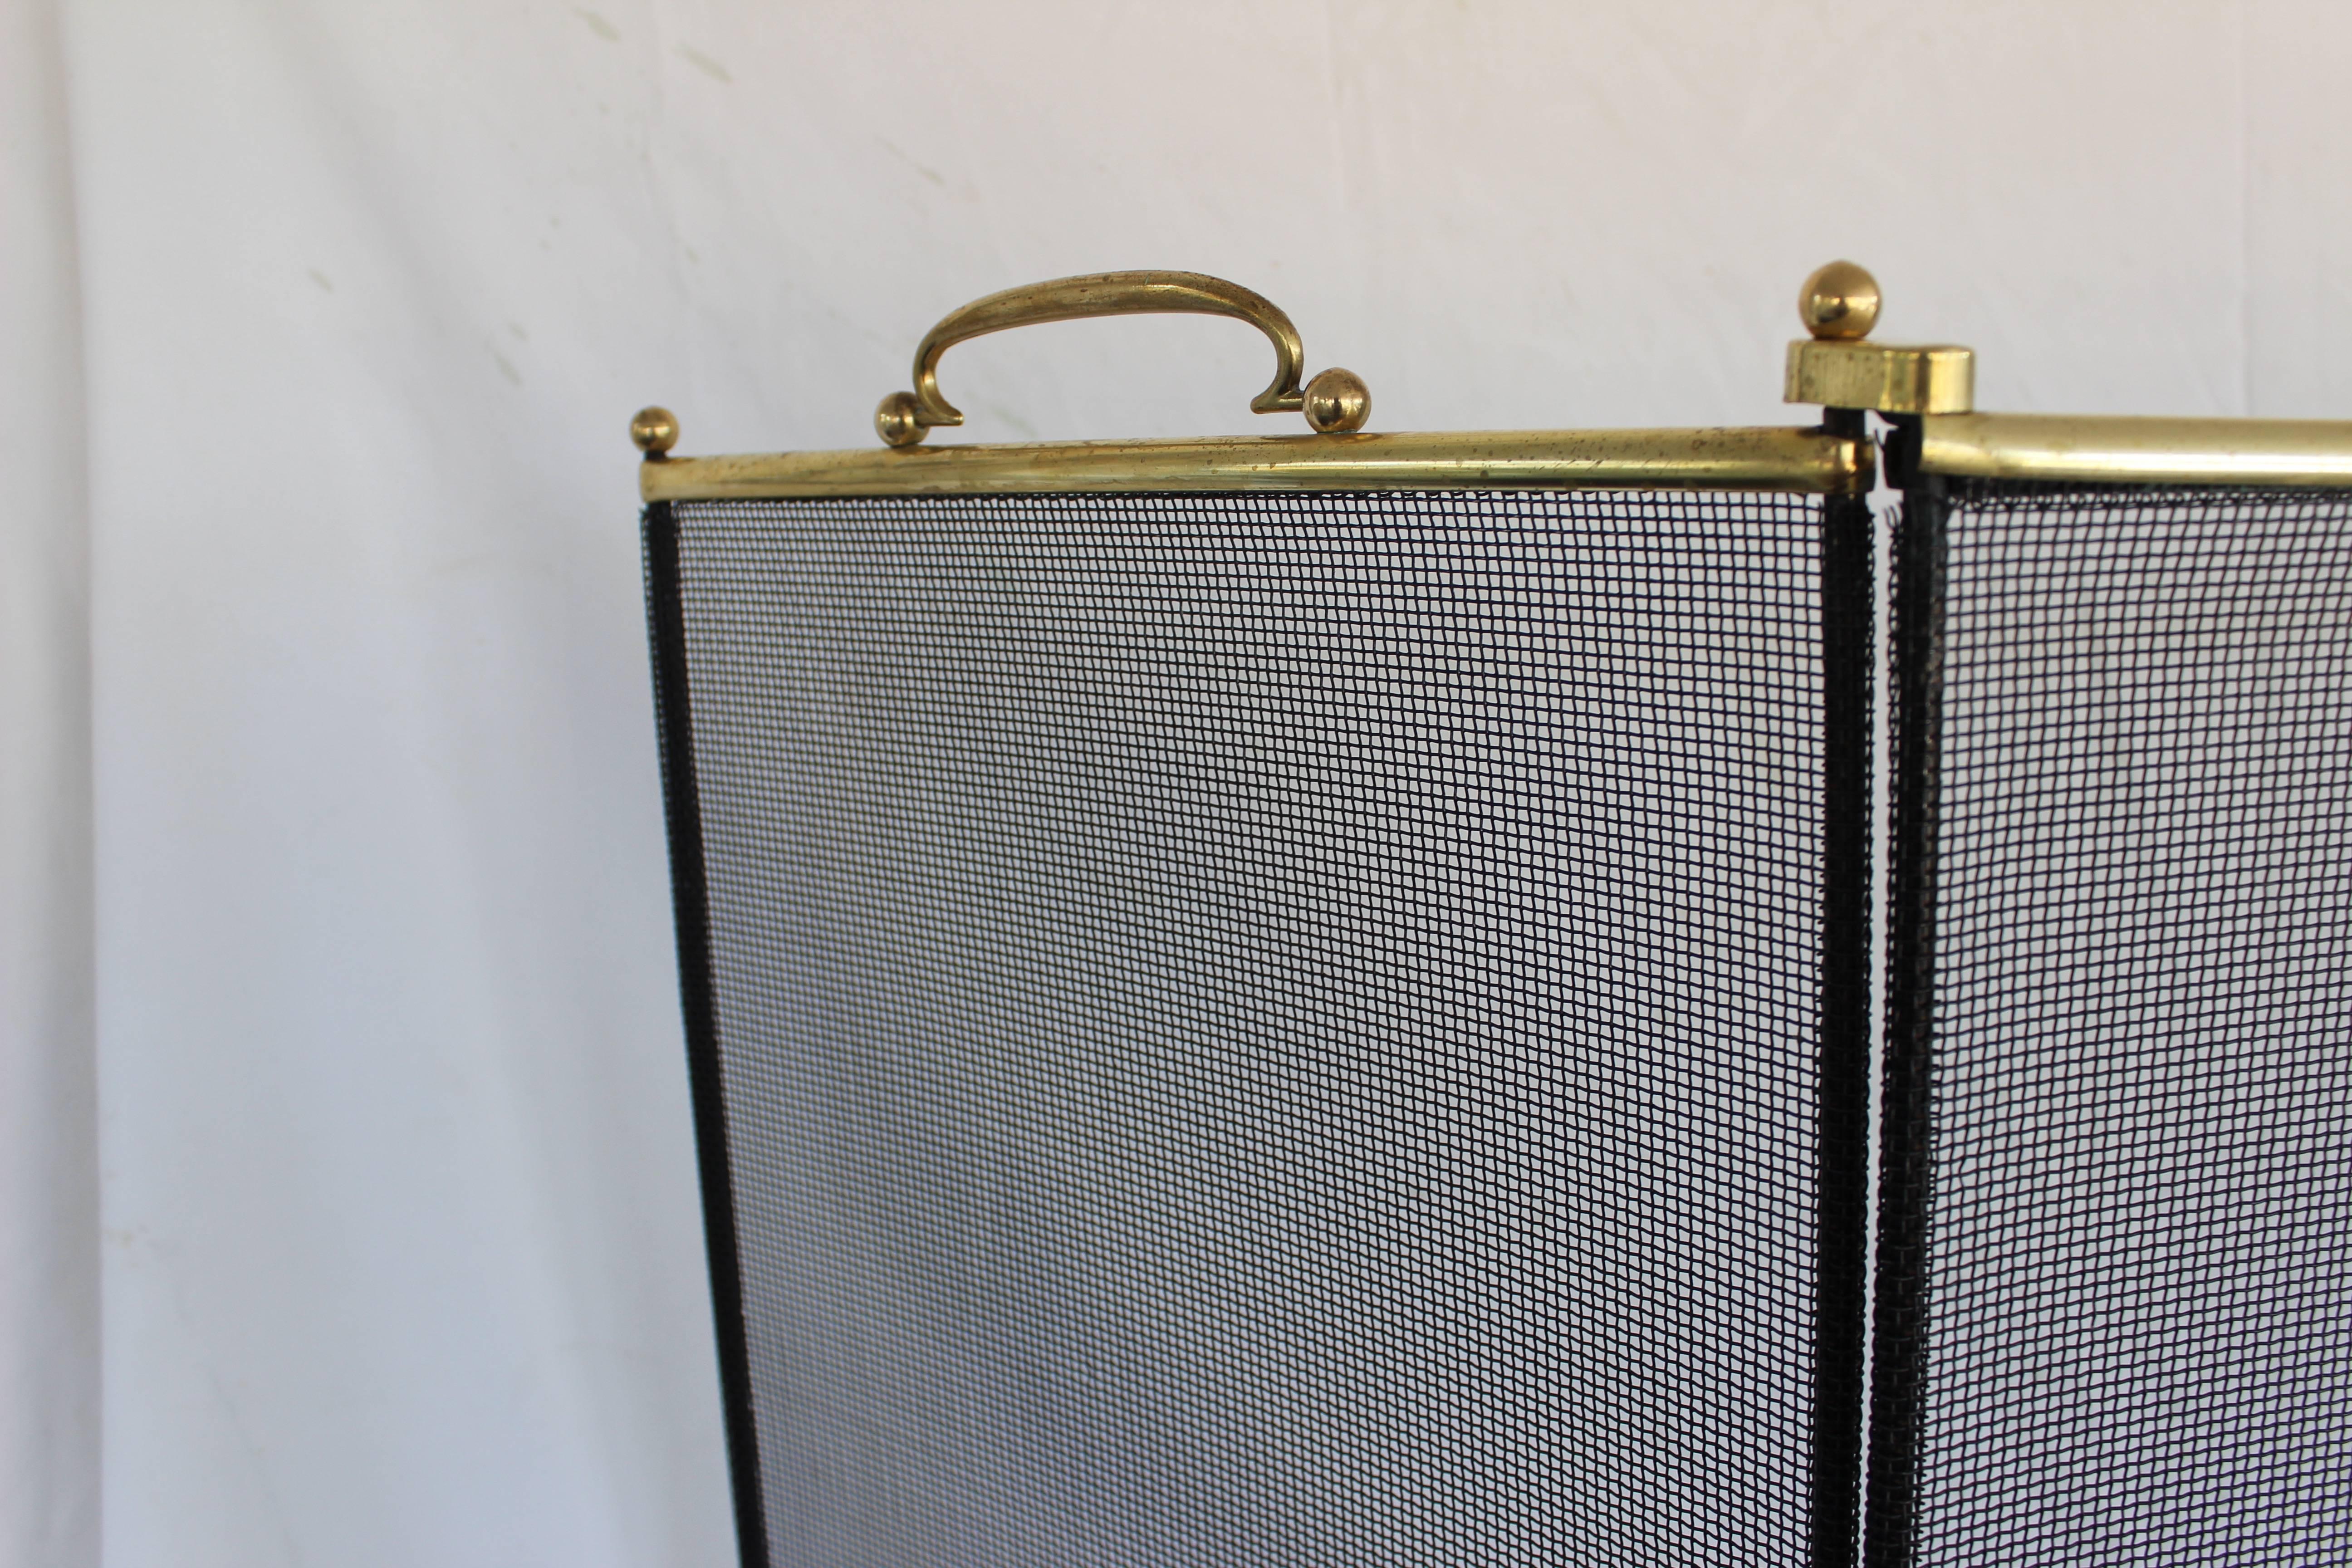 Brass and metal wire mesh fireplace screen

Opened flat measures 51.5